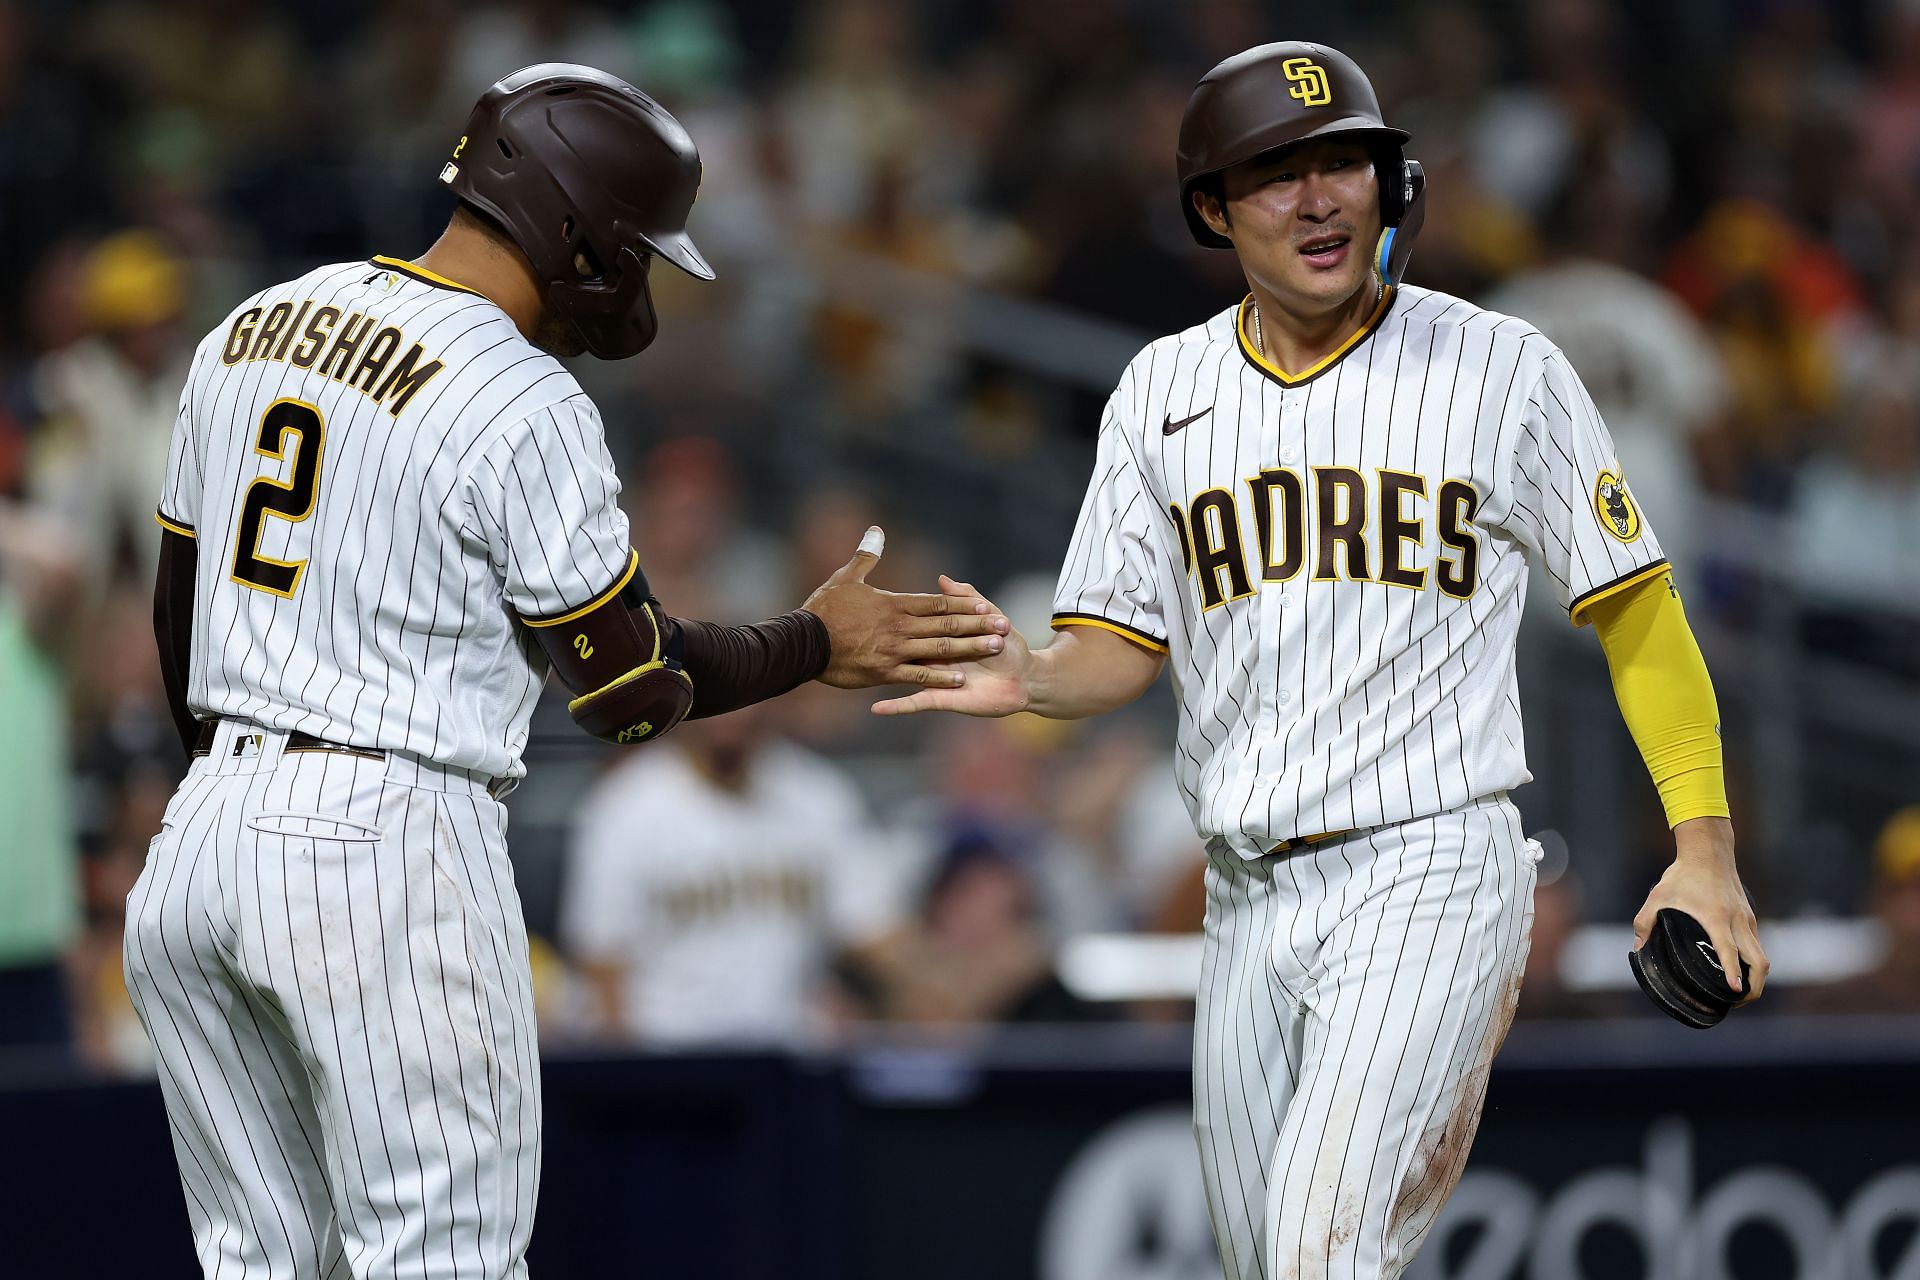 Padres focused on making Ha-seong Kim comfortable, with help from